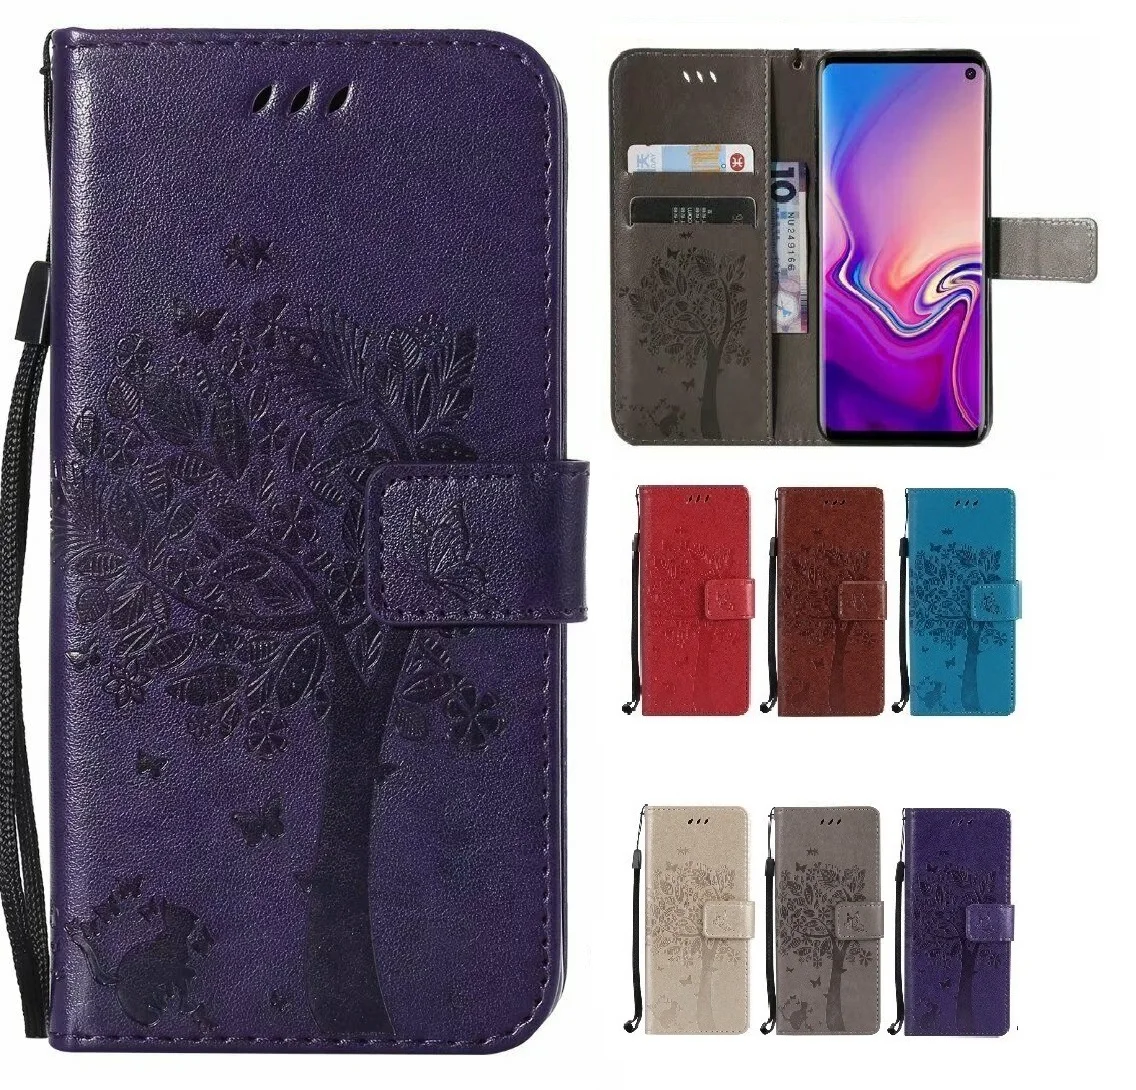 

Case flip PU Leather Cover With View For vertex impress pluto Rosso Zeon 3G Indigo Click NFC Forest Funk City Reef